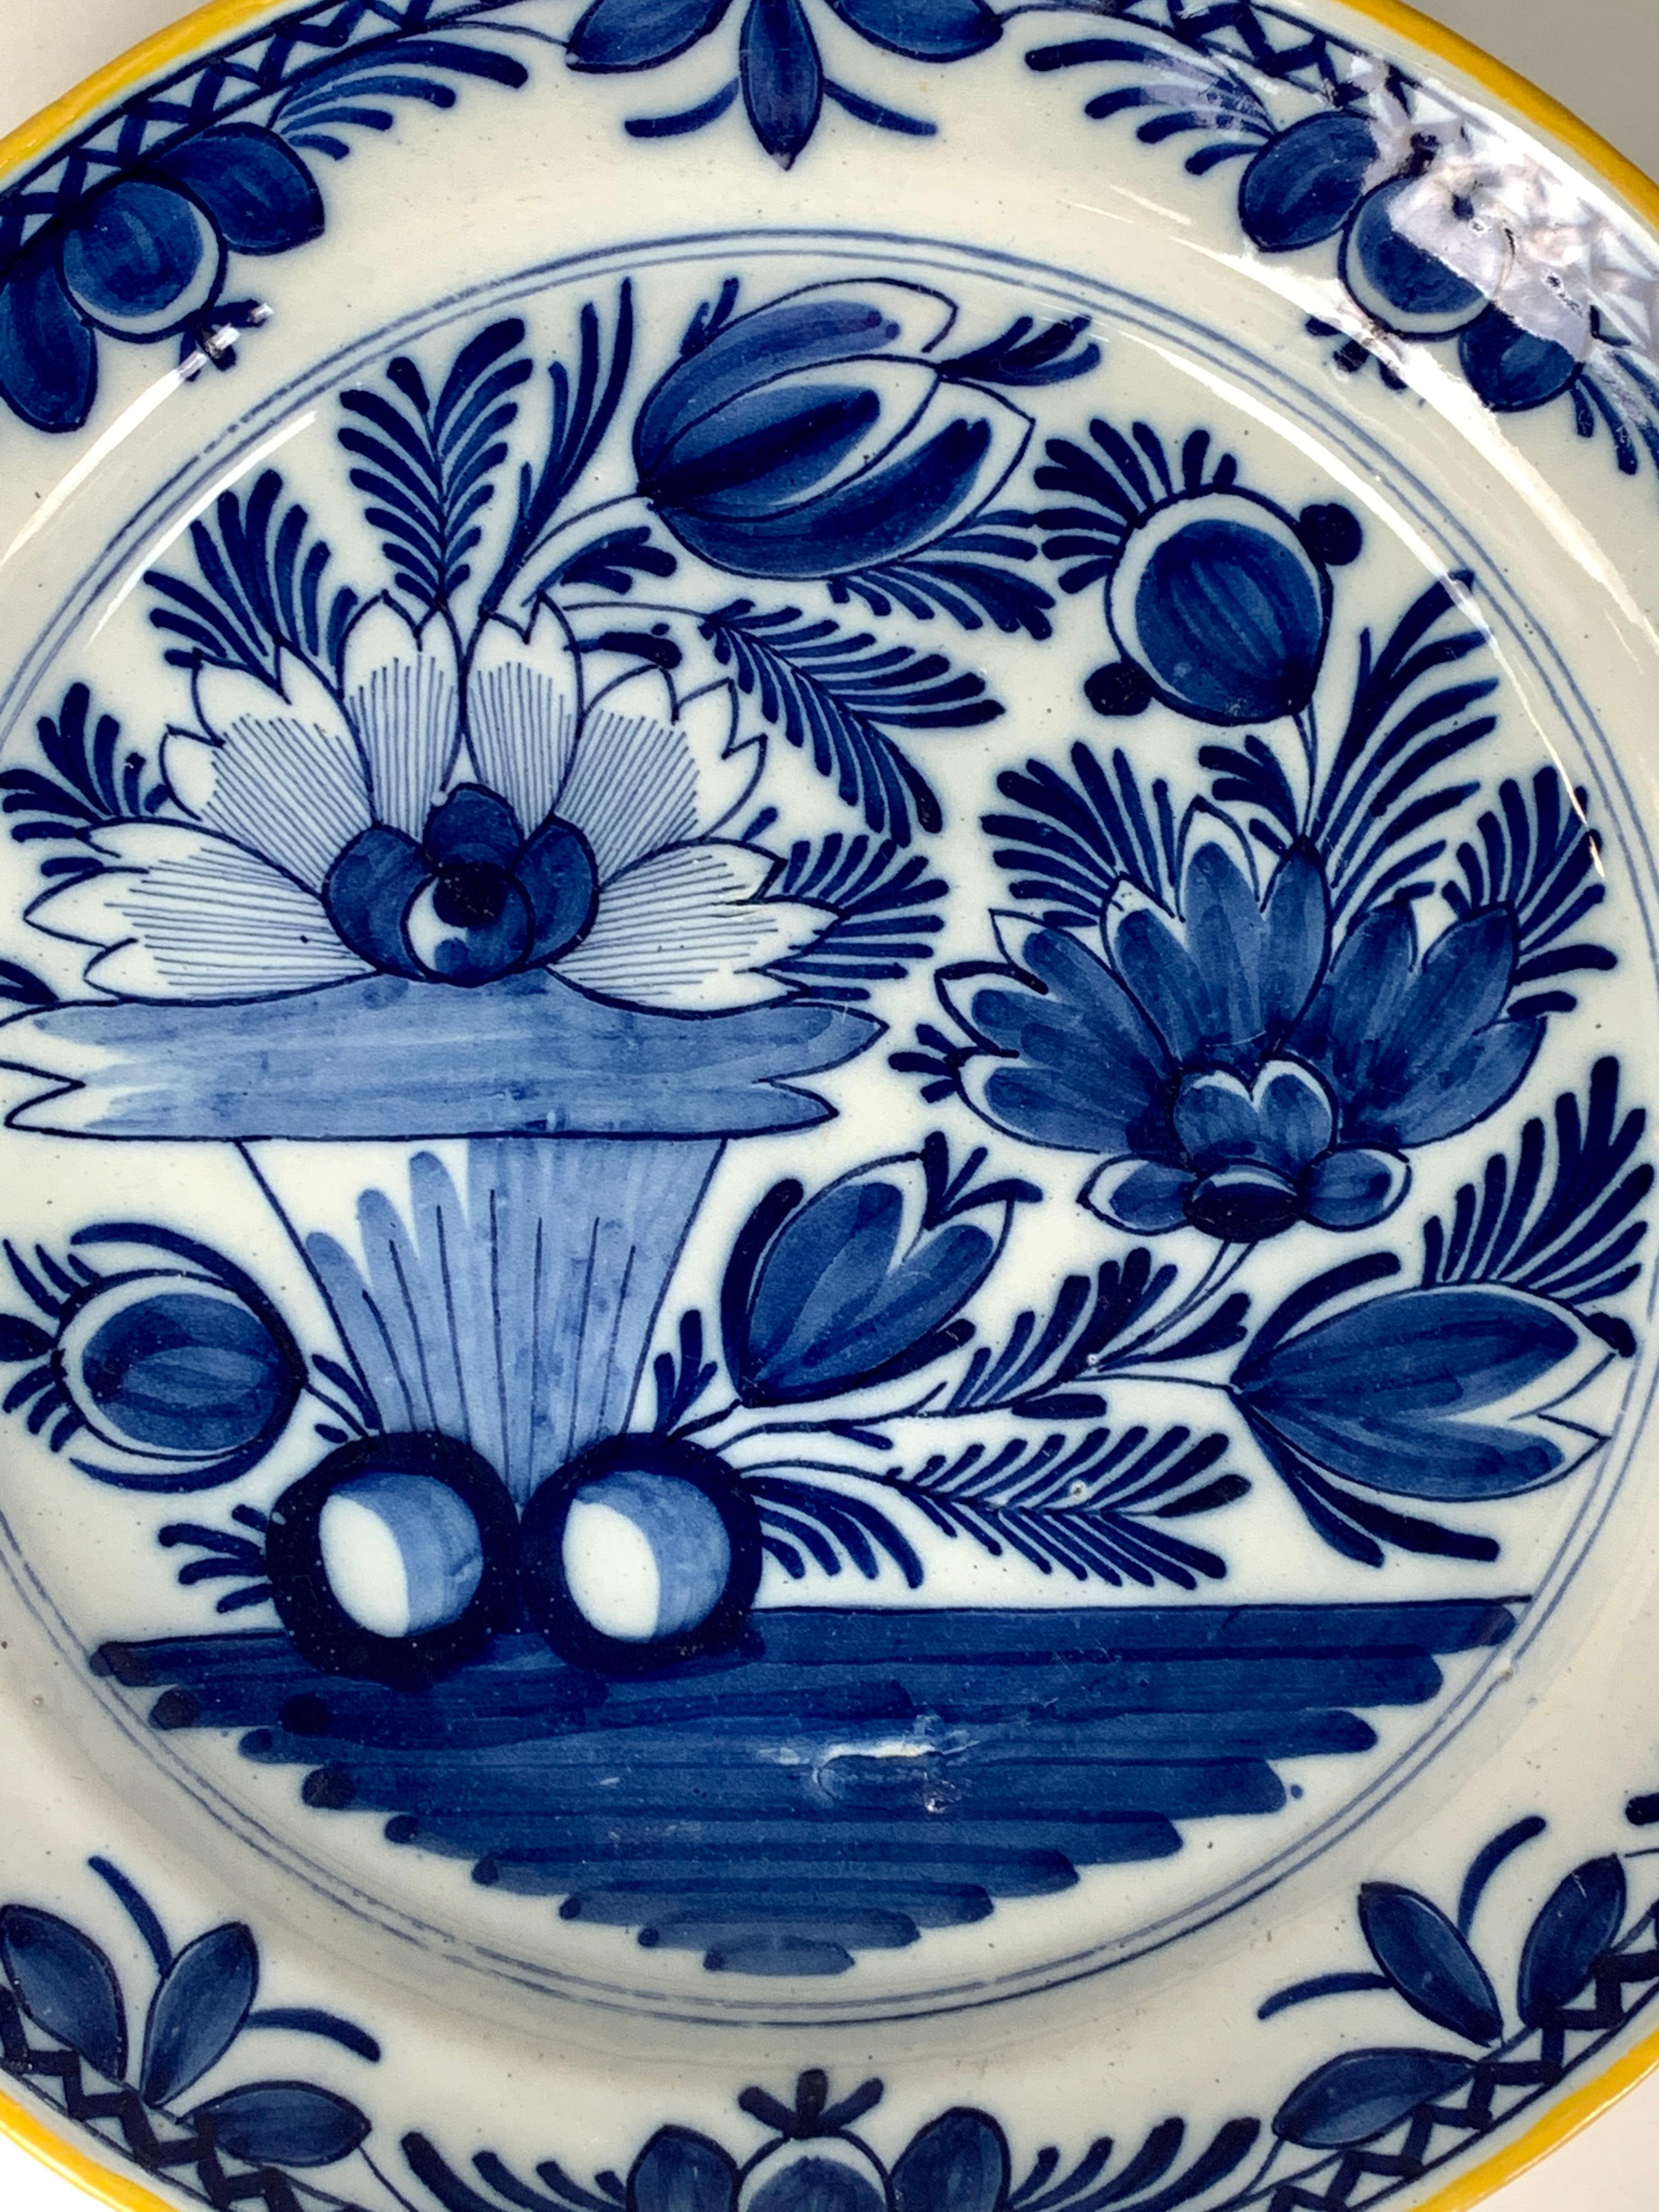 An antique blue and white Dutch Delft charger showing tulips and peonies. 
The bright cobalt blue is splendid on the bright white tin glaze background.
 The border is filled with a floral design. A zig-zag design appears just before the edge,
